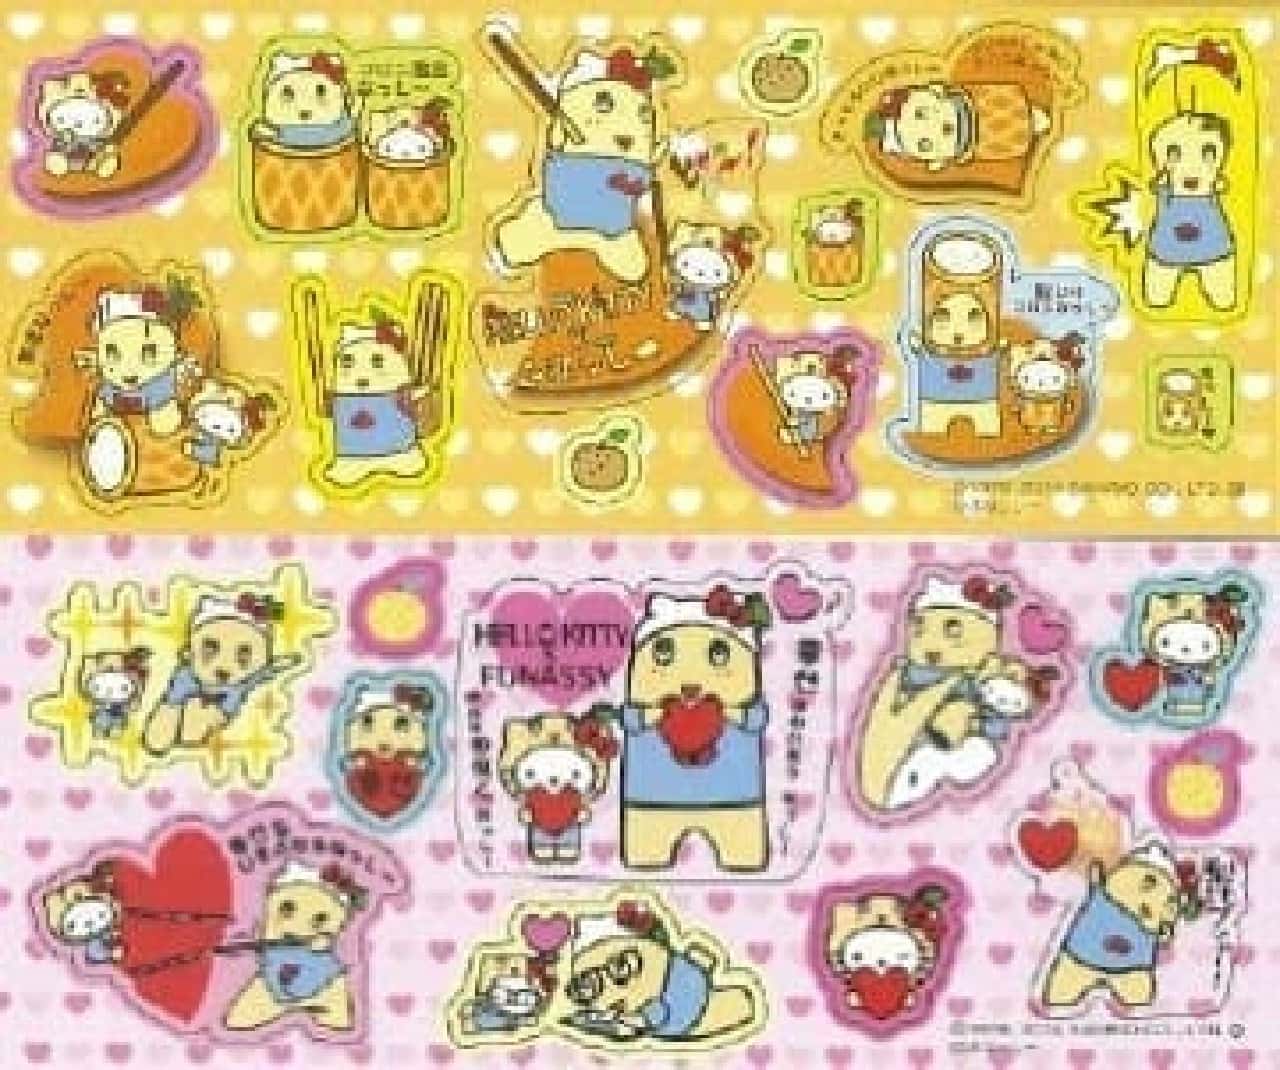 Limited to 30 at each store ...! (C) 1976,2014 SANRIO CO., LTD. APPROVAL No.G552449 / (c) Funassyi